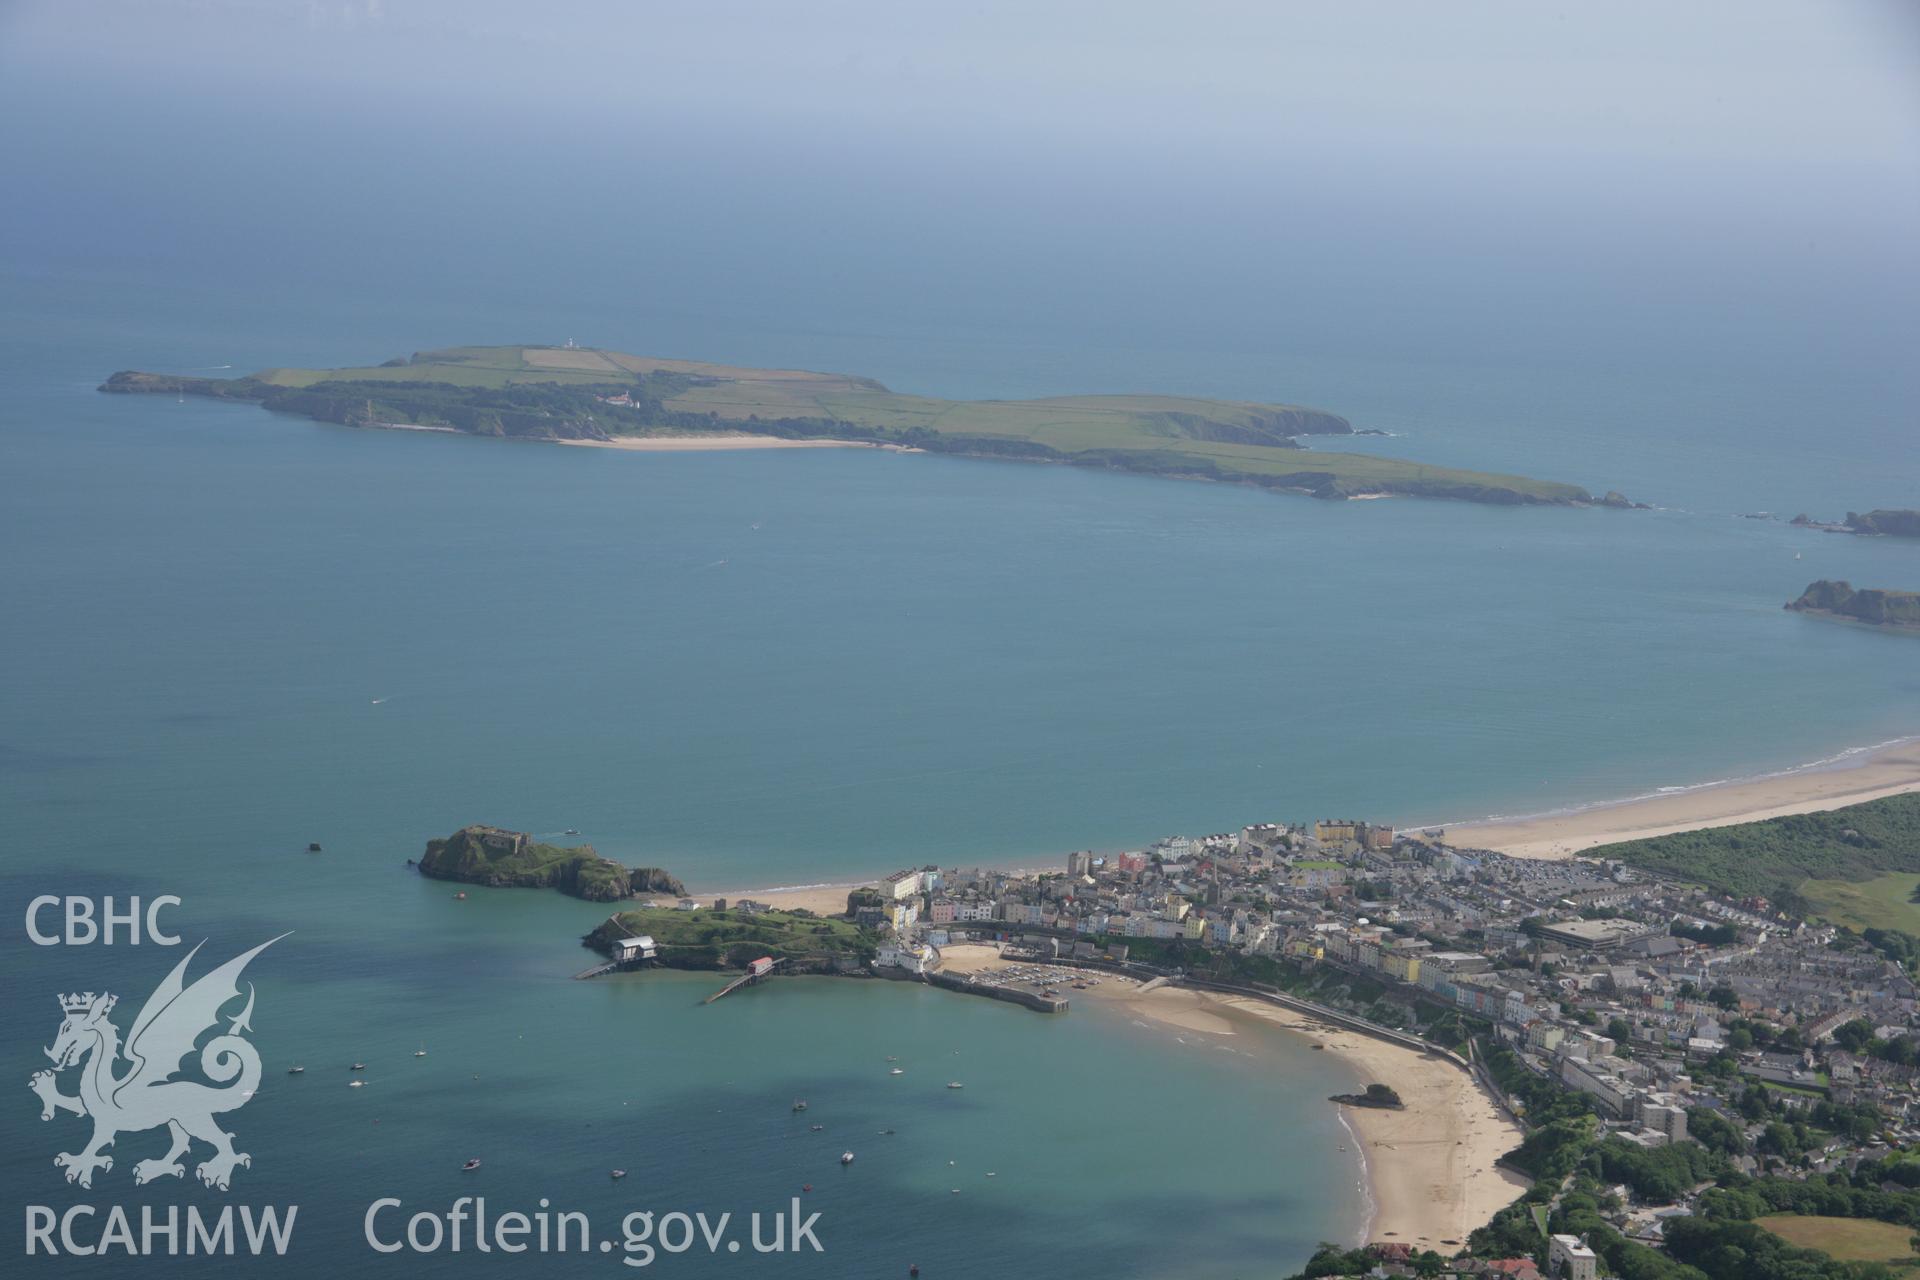 RCAHMW colour oblique aerial photograph of Tenby and surrounding landscape. Taken on 11 July 2006 by Toby Driver.